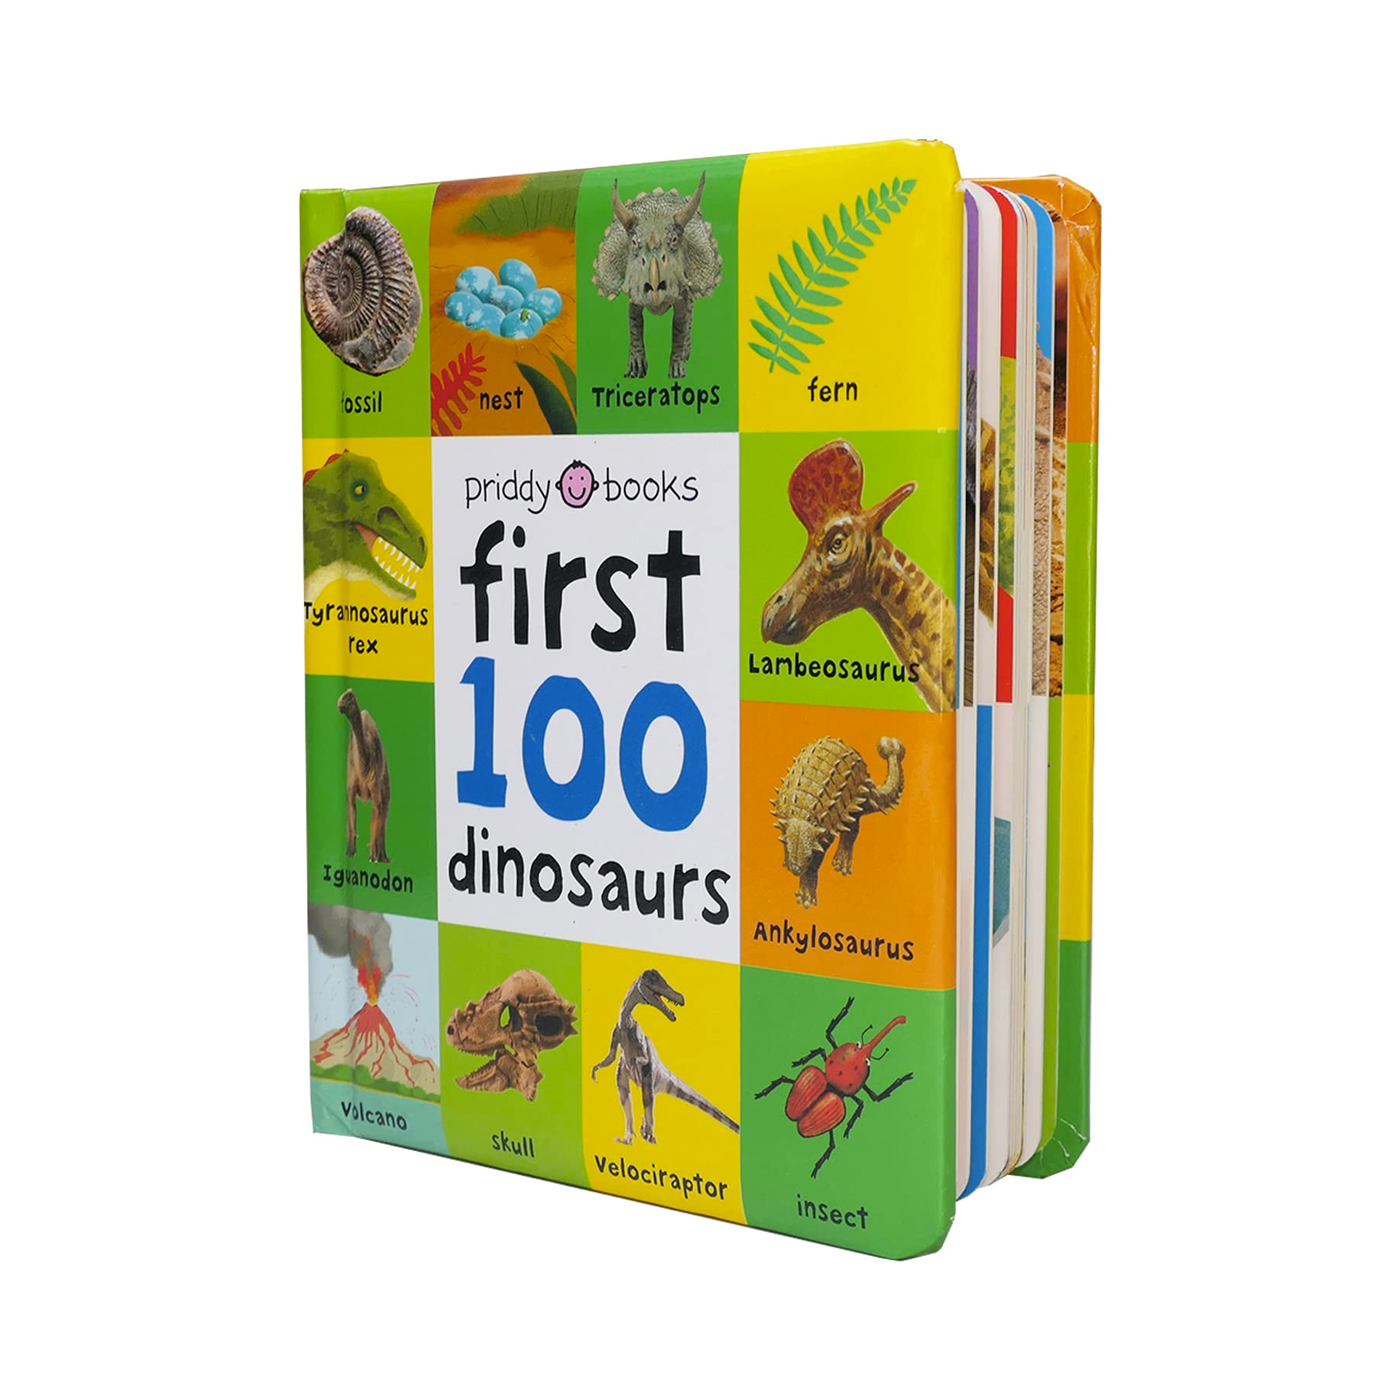 PRIDDY BOOKS First 100 Dinosaurs